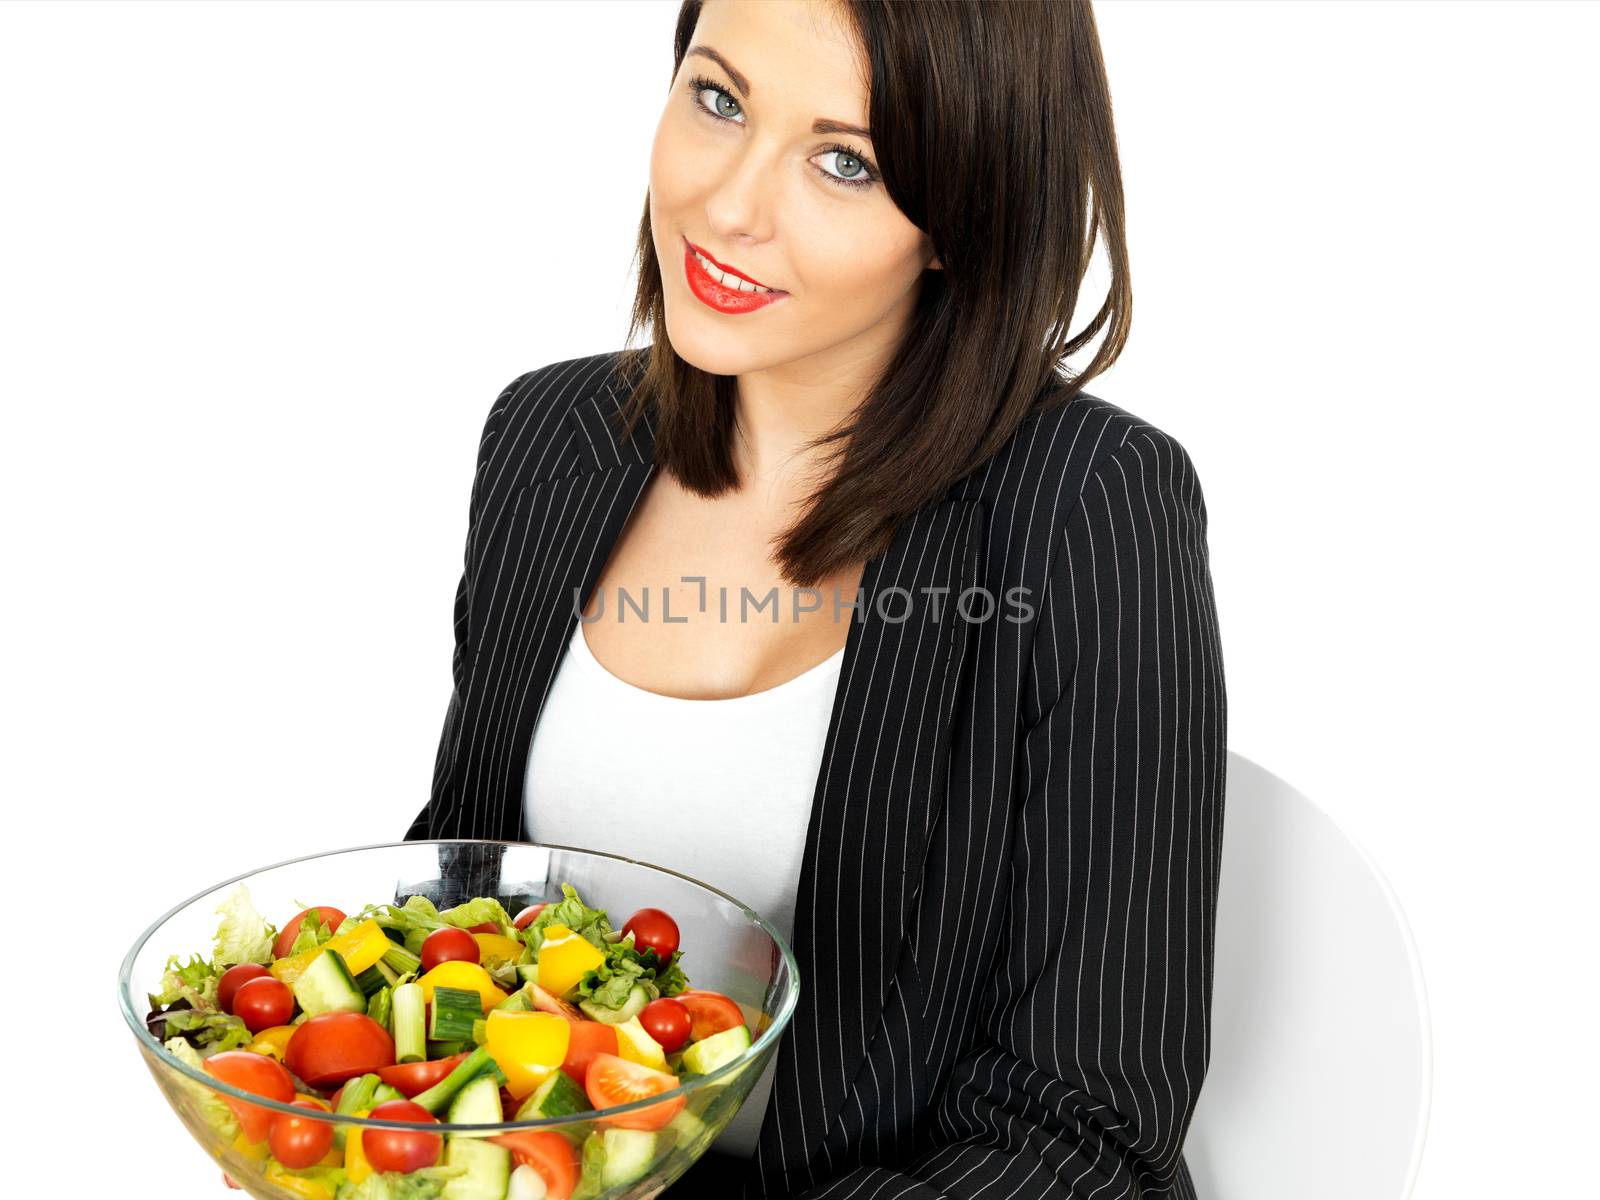 Attractive Young Woman Holding a Bowl of Mixed Salad